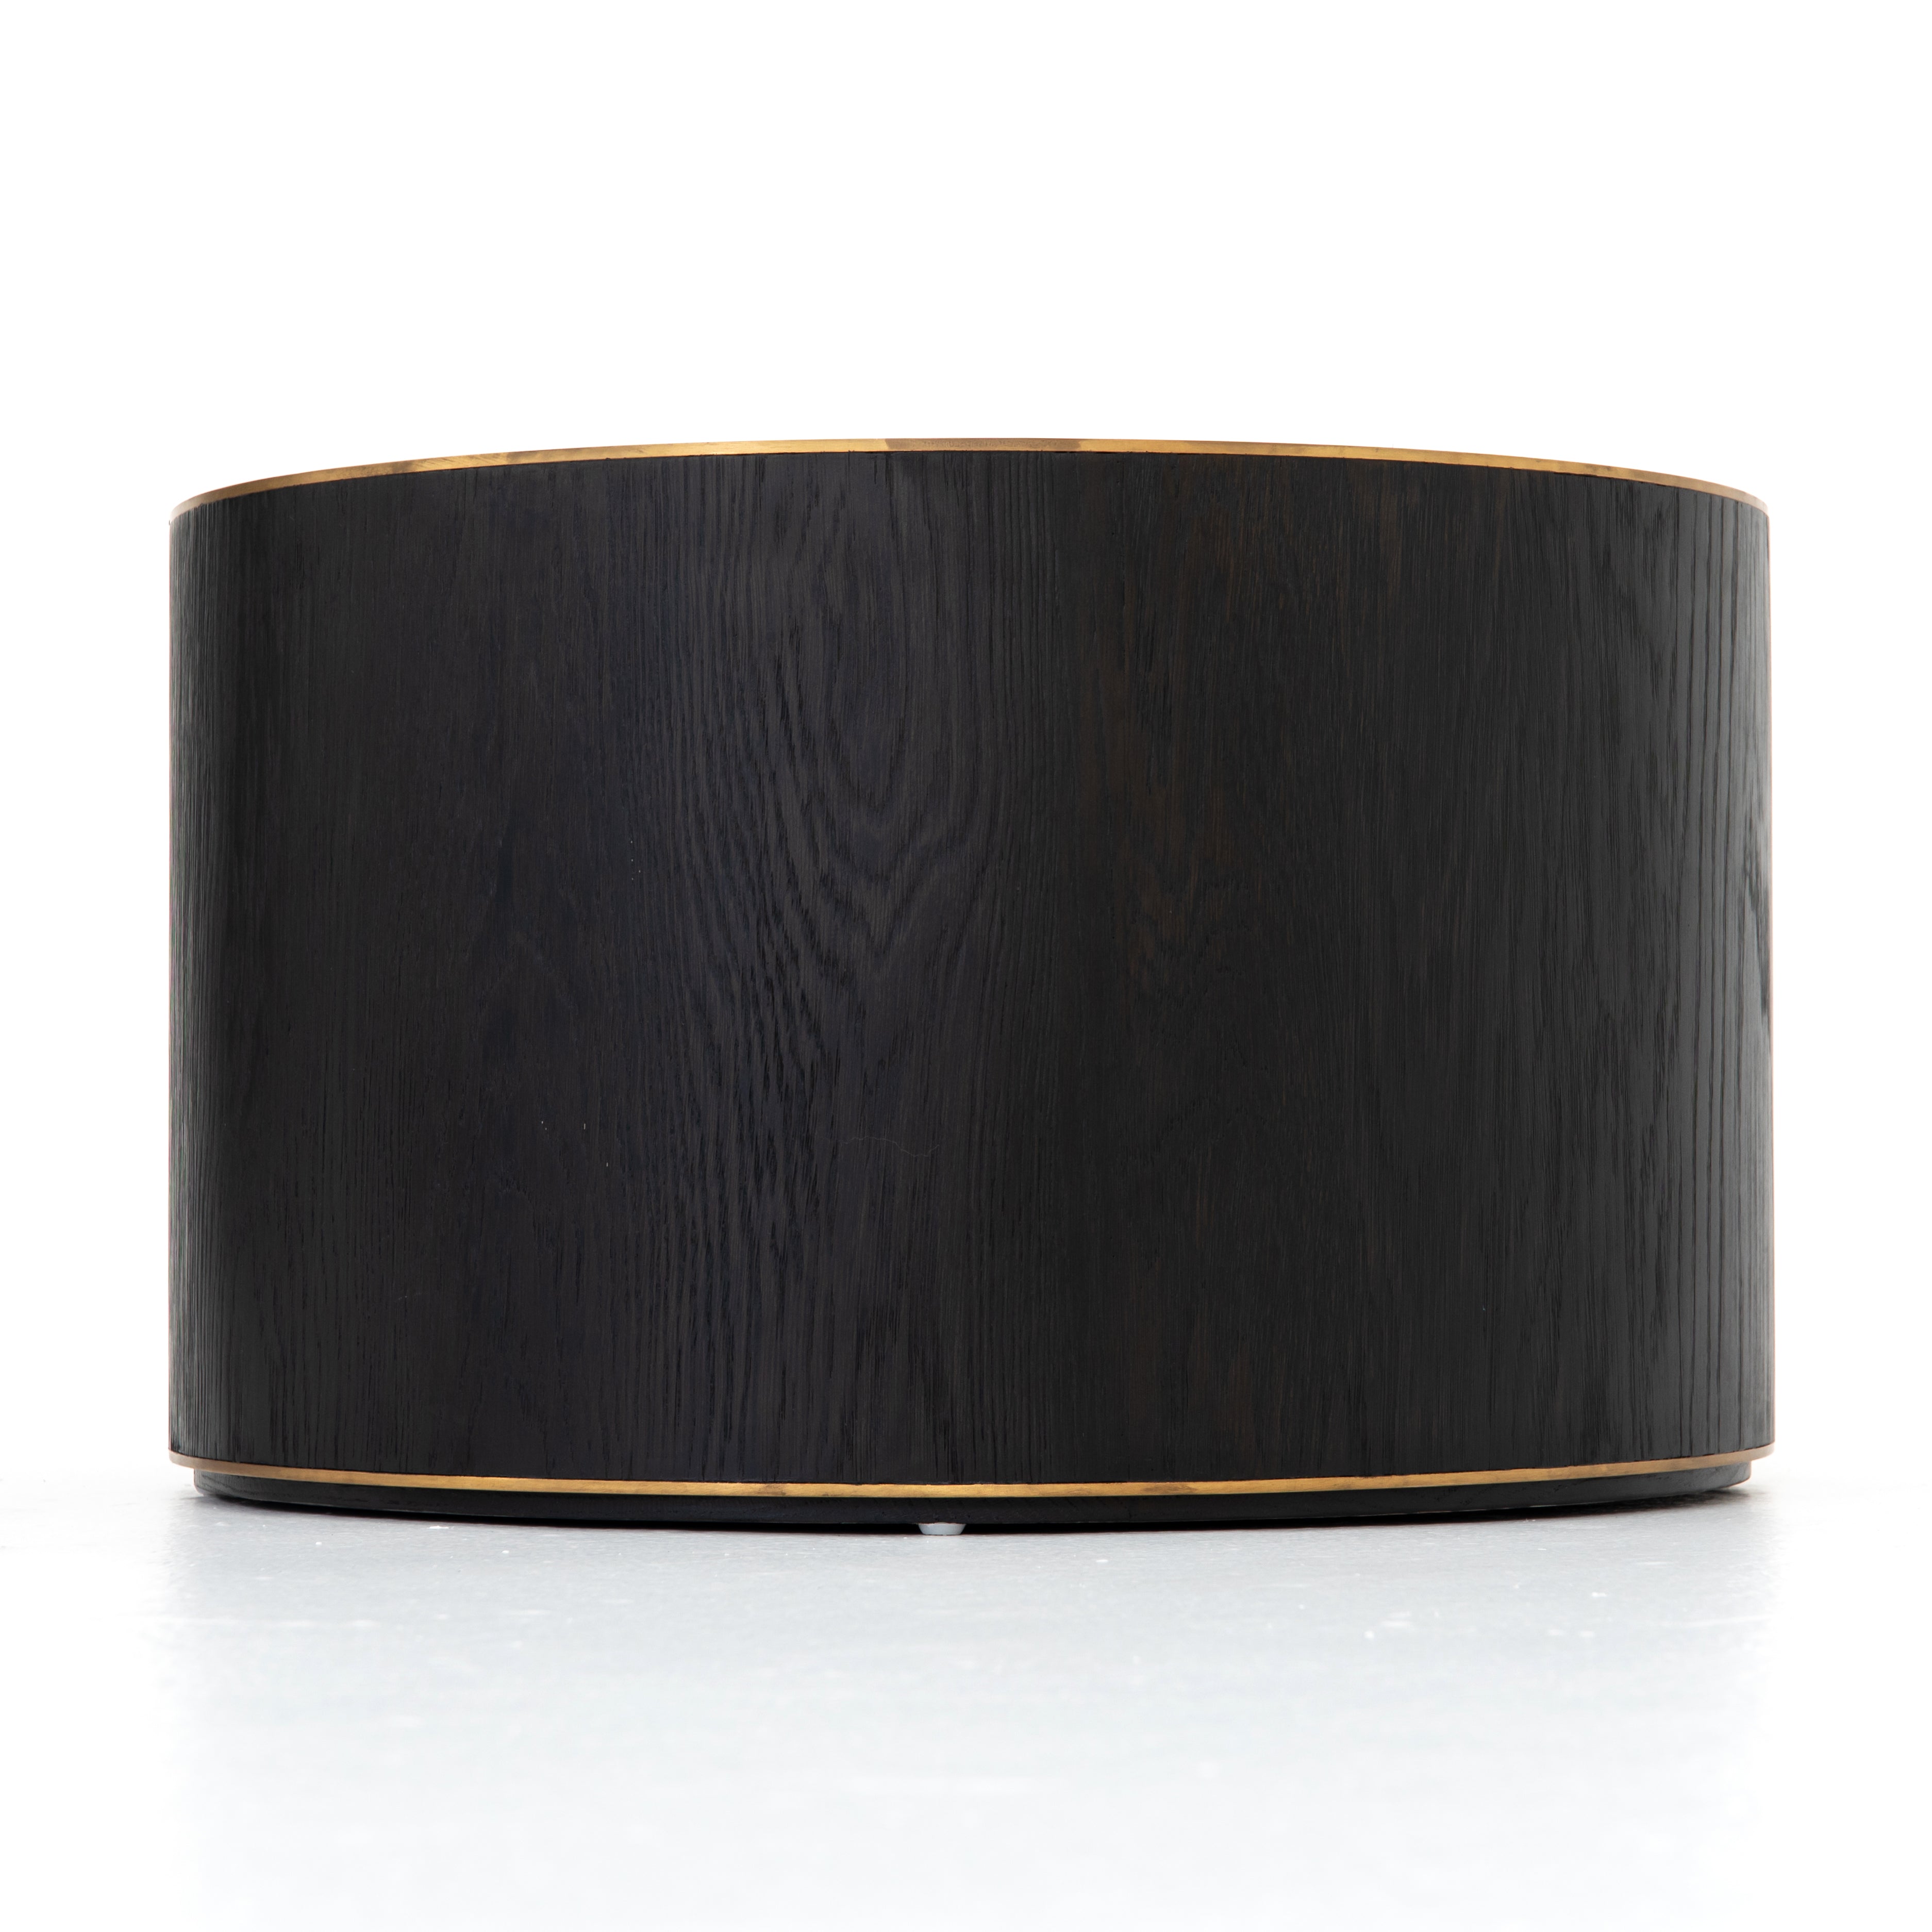 Bring on the drama. An ebony-finished oak top is cut in a starburst texture, framed by deep ebony sides, and encircled by bright brass-clad binding. Amethyst Home provides interior design, new construction, custom furniture, and area rugs in the Seattle metro area.